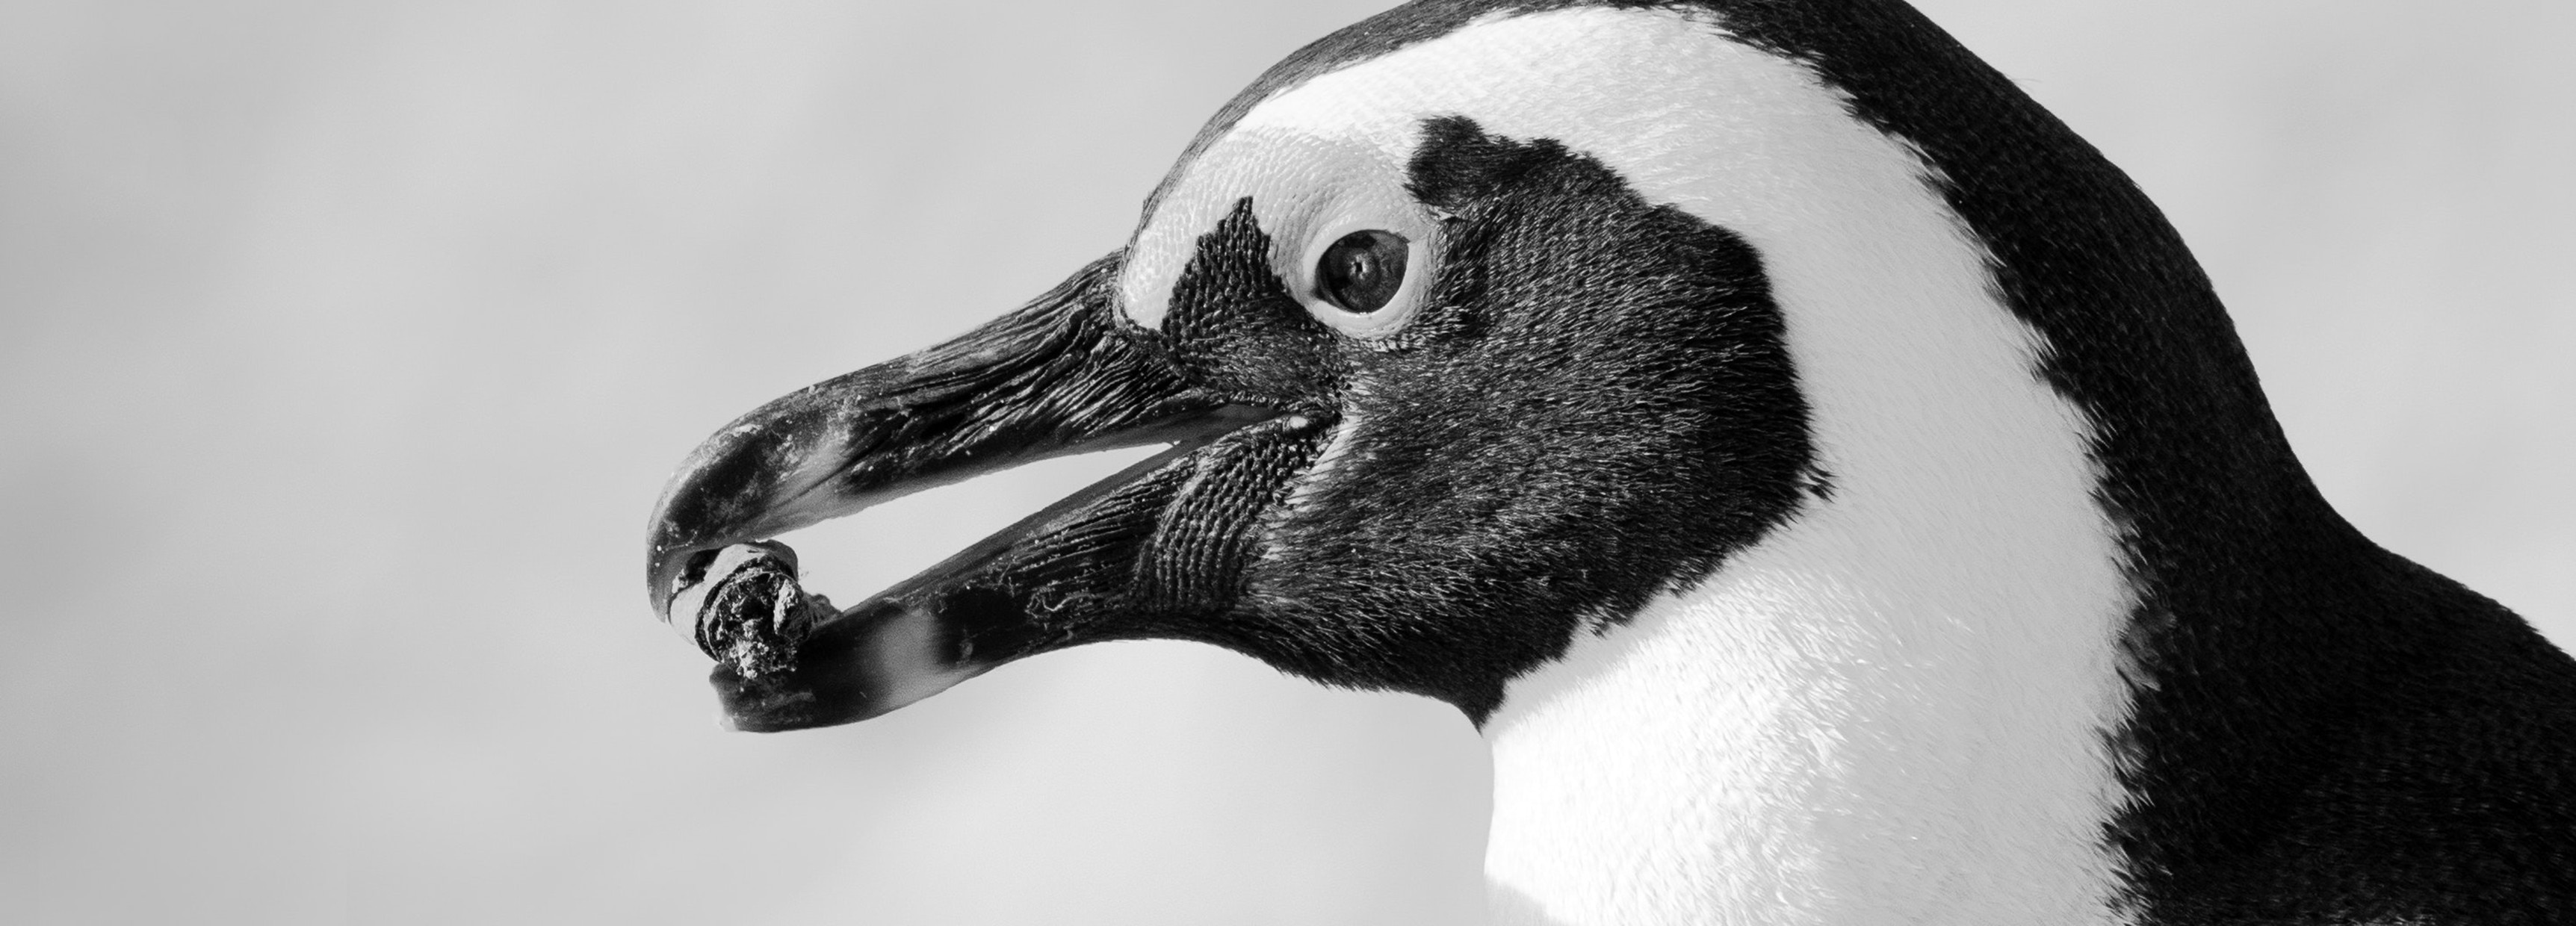 The Gift To Win A Penguin's Heart | Bbc Earth